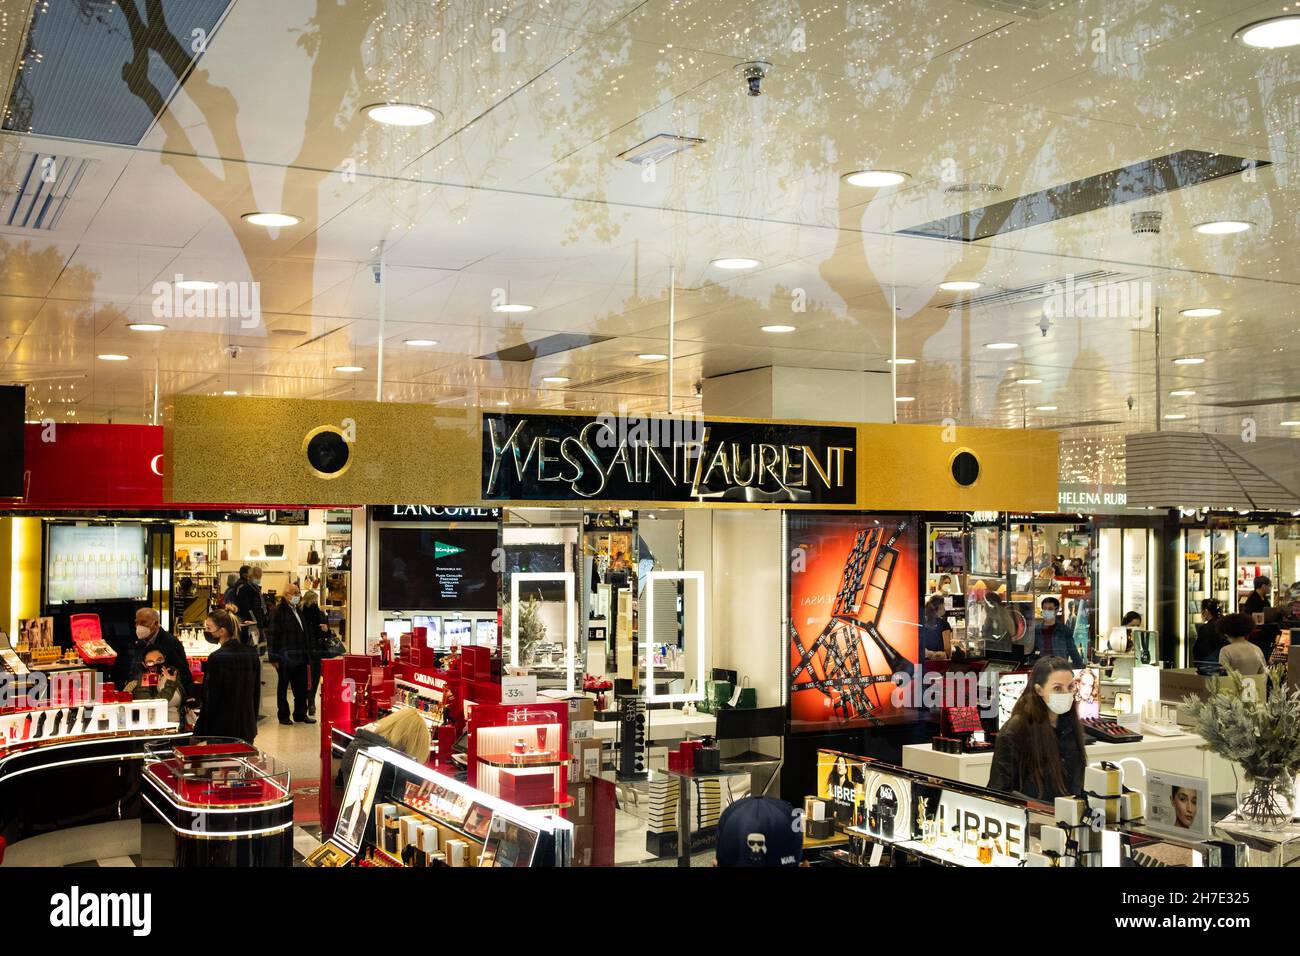 Yves Saint Laurent fashion luxury store in avenue Montaigne on